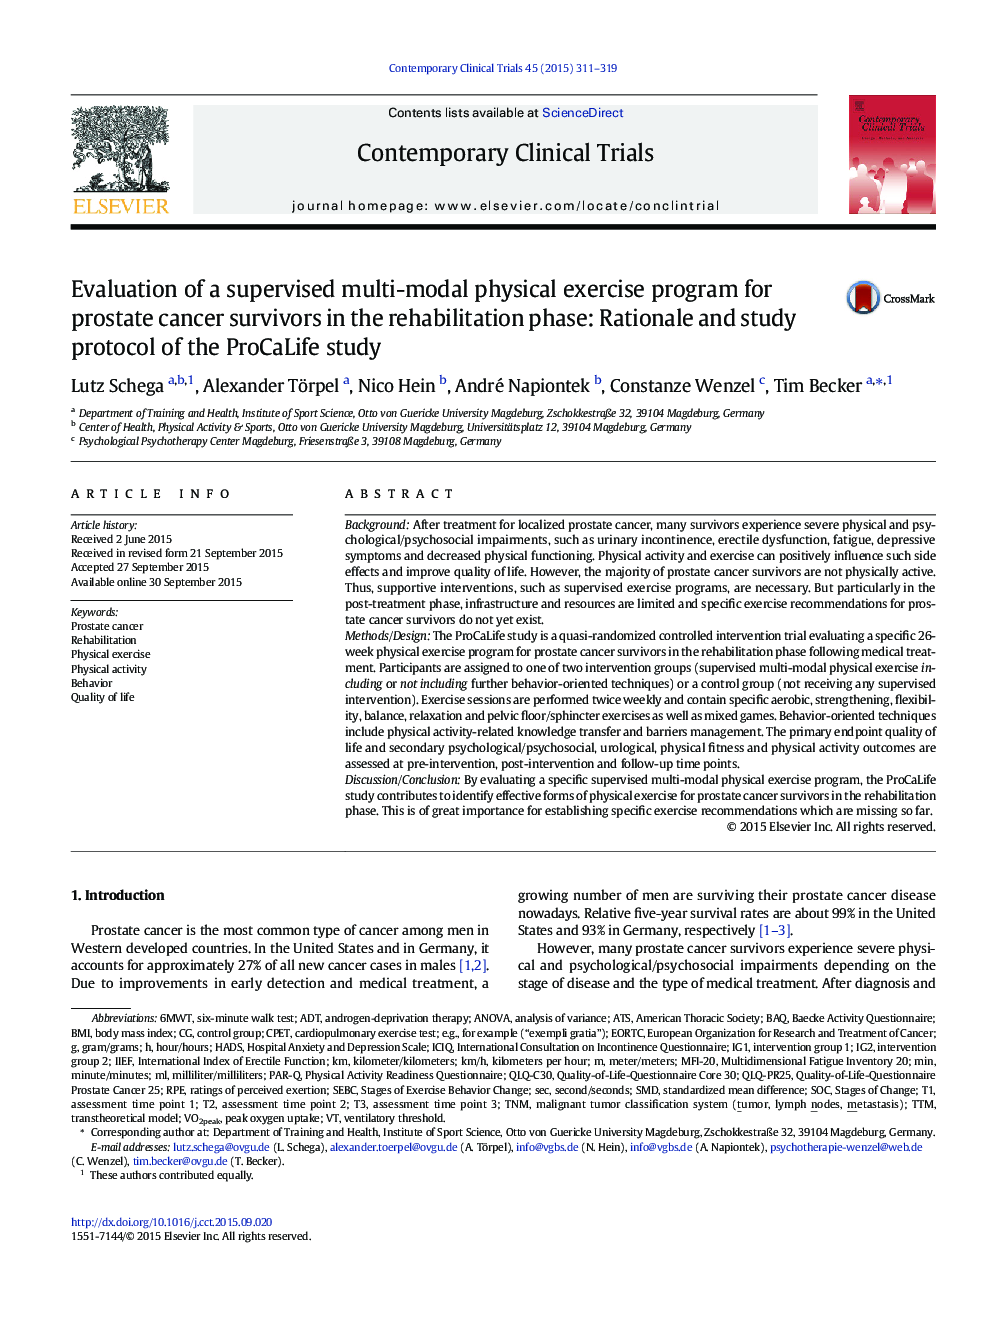 Evaluation of a supervised multi-modal physical exercise program for prostate cancer survivors in the rehabilitation phase: Rationale and study protocol of the ProCaLife study